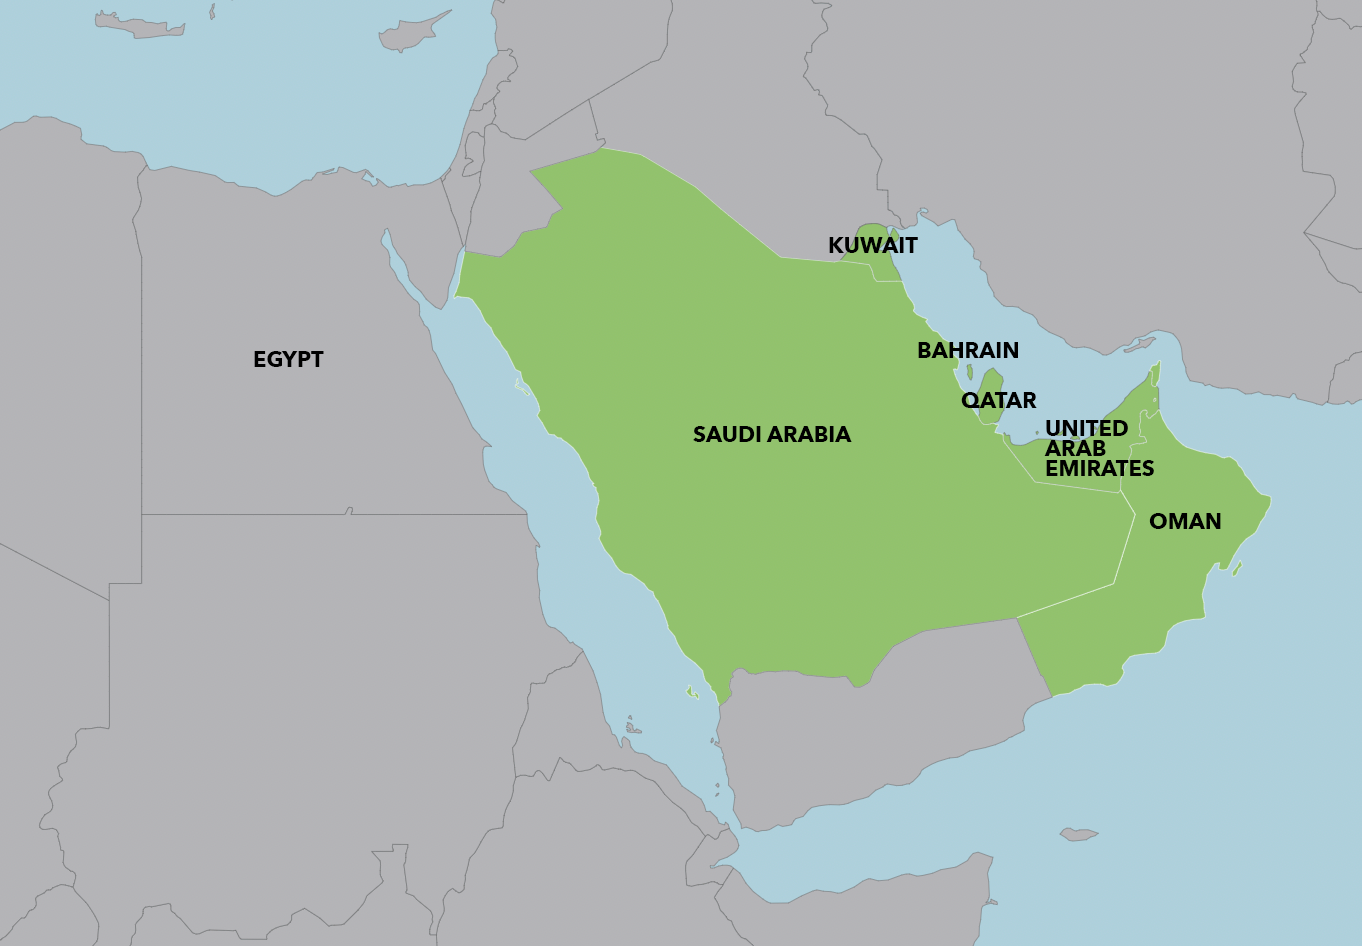 Figure 2: Map showing Egypt in relation to the Gulf countries, illustrated in green